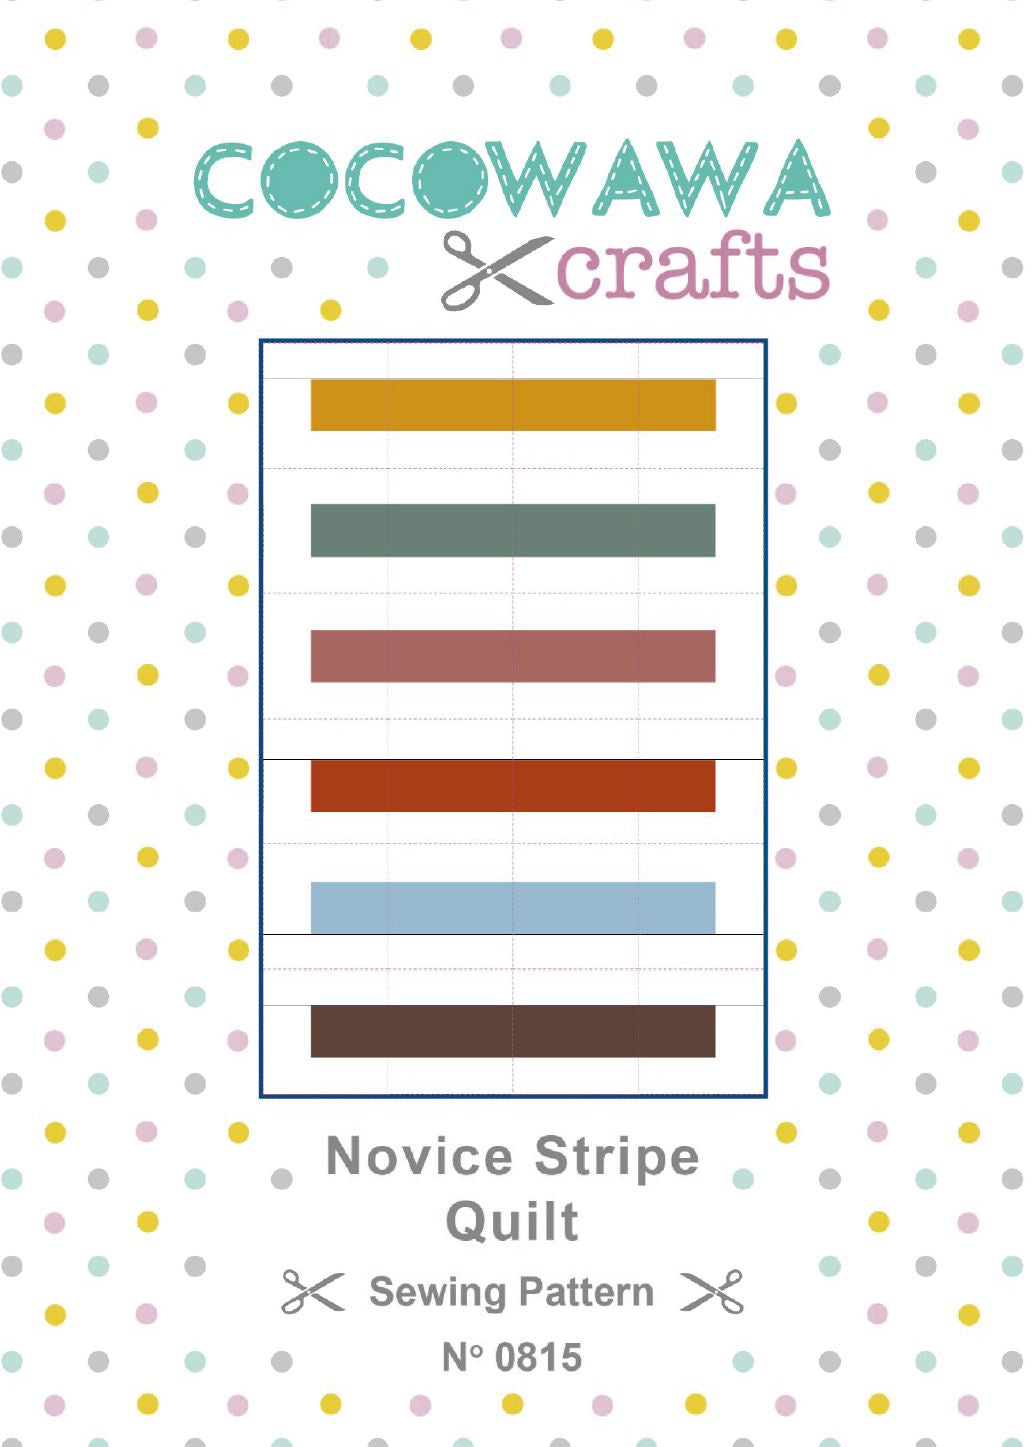 Novice Stripe Quilt sewing pattern CocoWawa cover